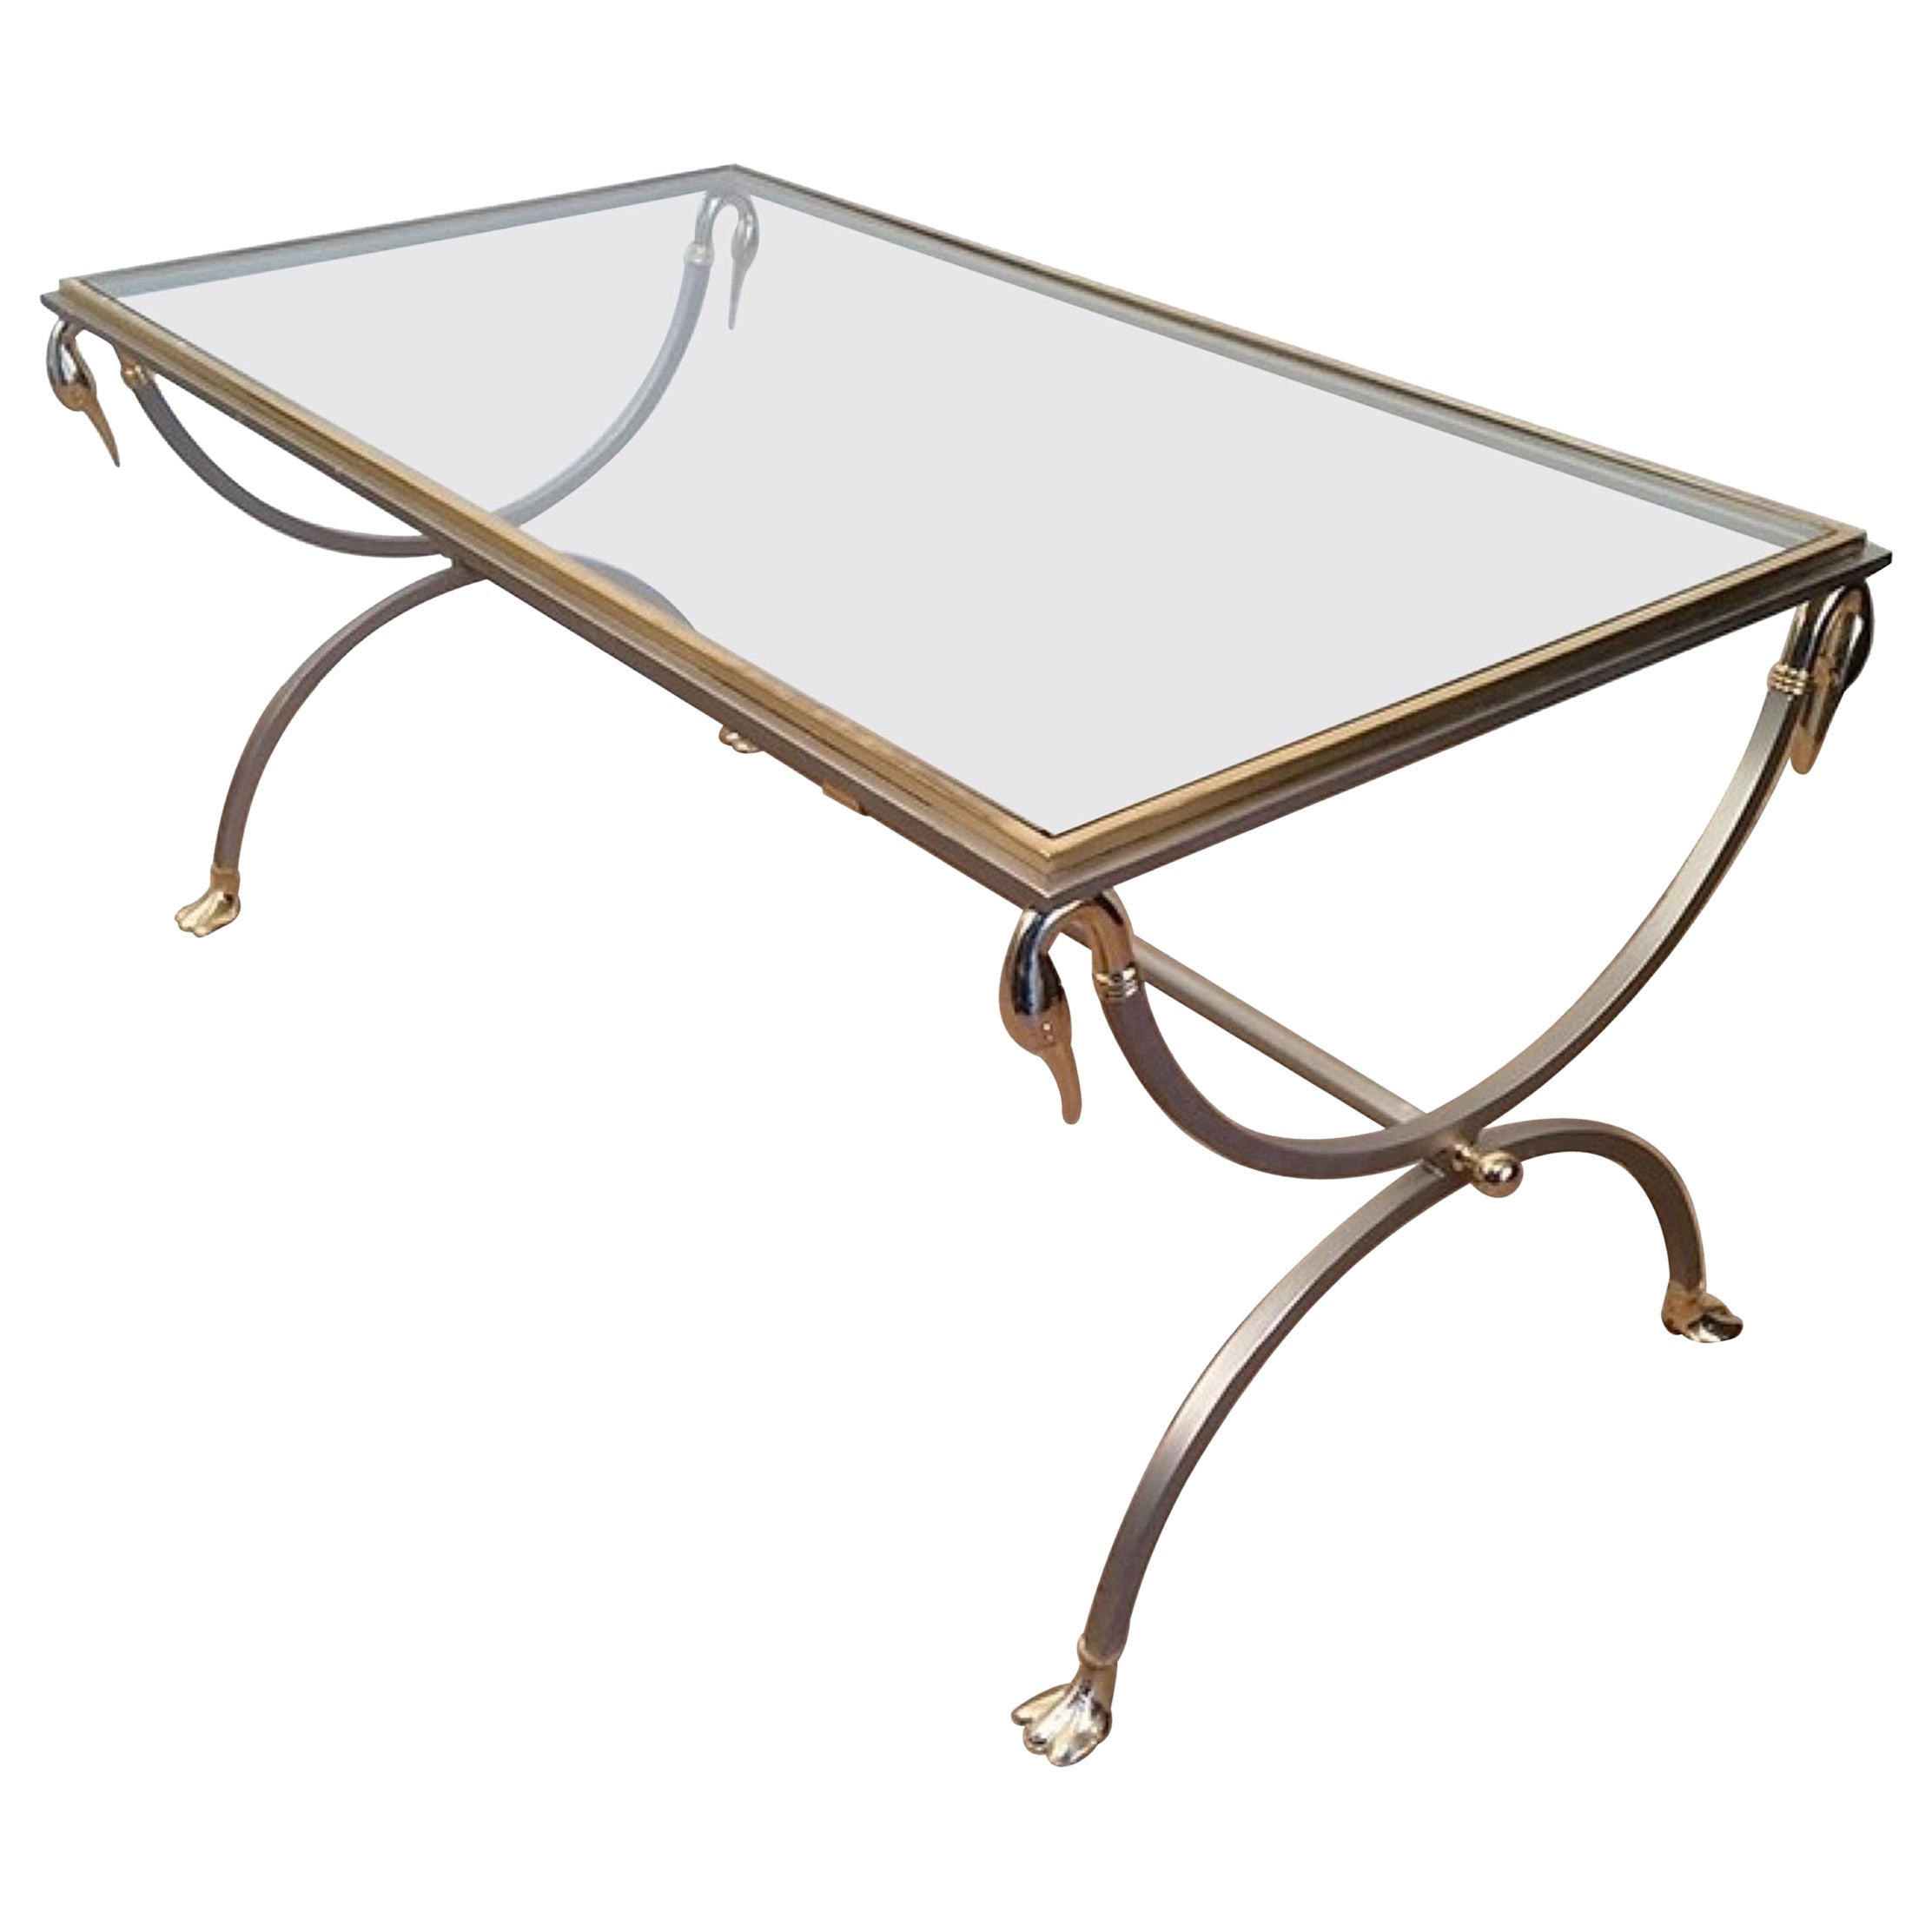 Attributed to Maison Jansen, Brushed Steel & Brass Coffee Table with Swanheads